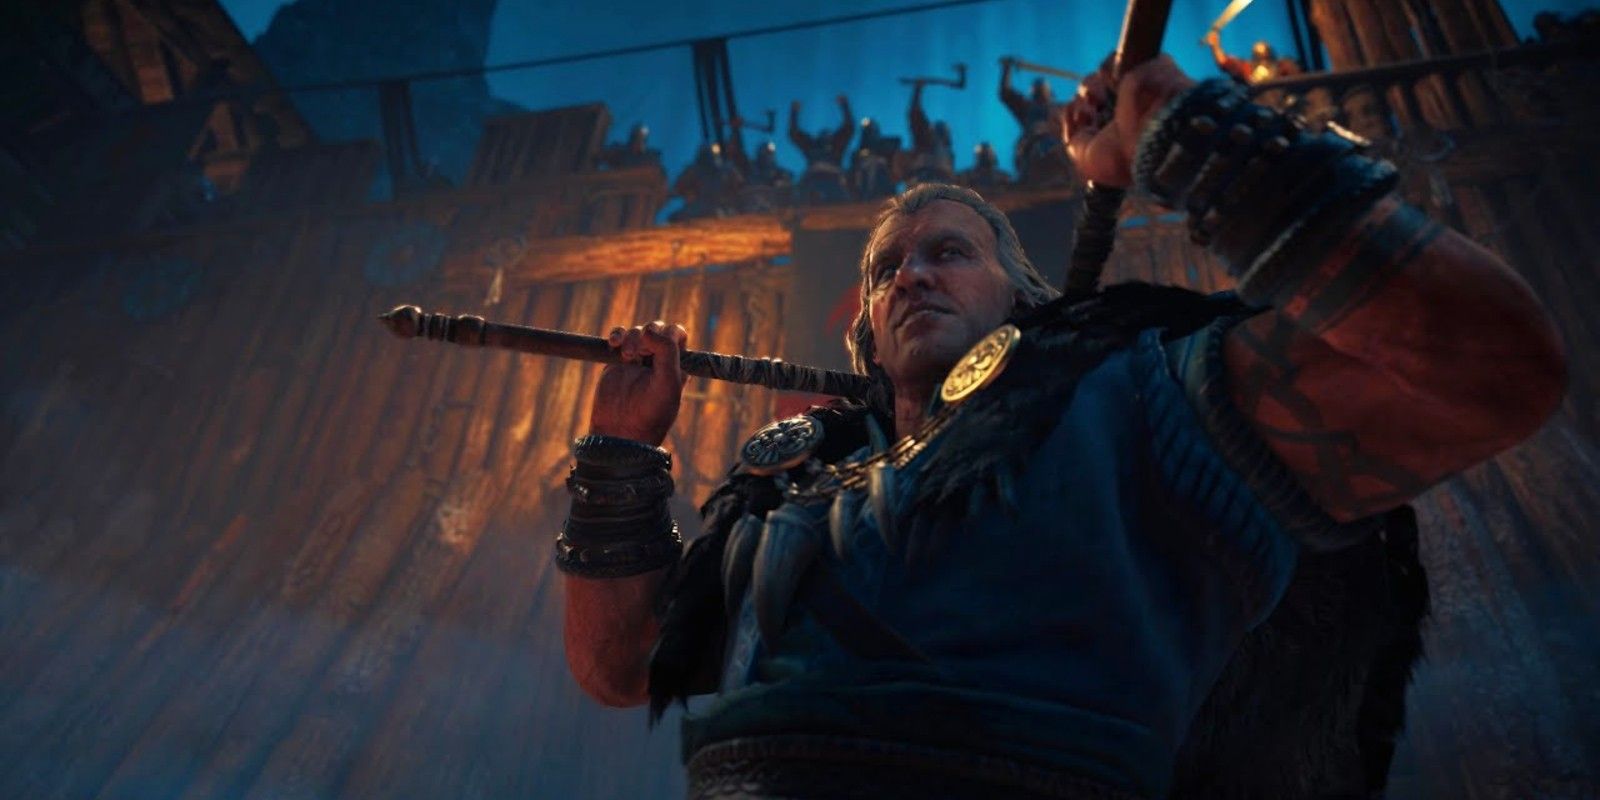 Kjotve the Cruel from Assassin's Creed: Valhalla holding two axes behind his back